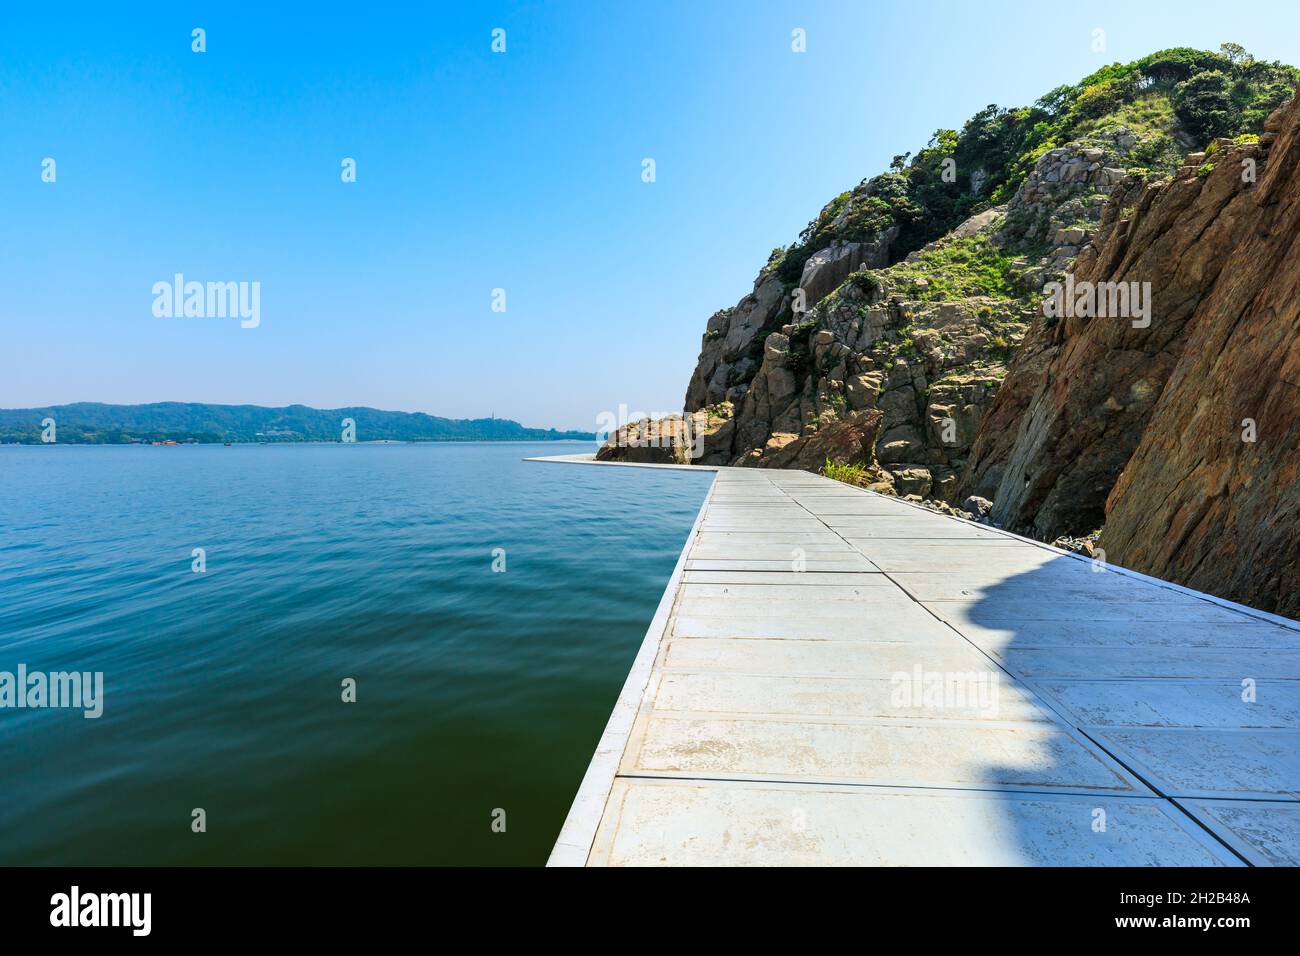 Lakeside walkways and mountains with river landscape. Stock Photo